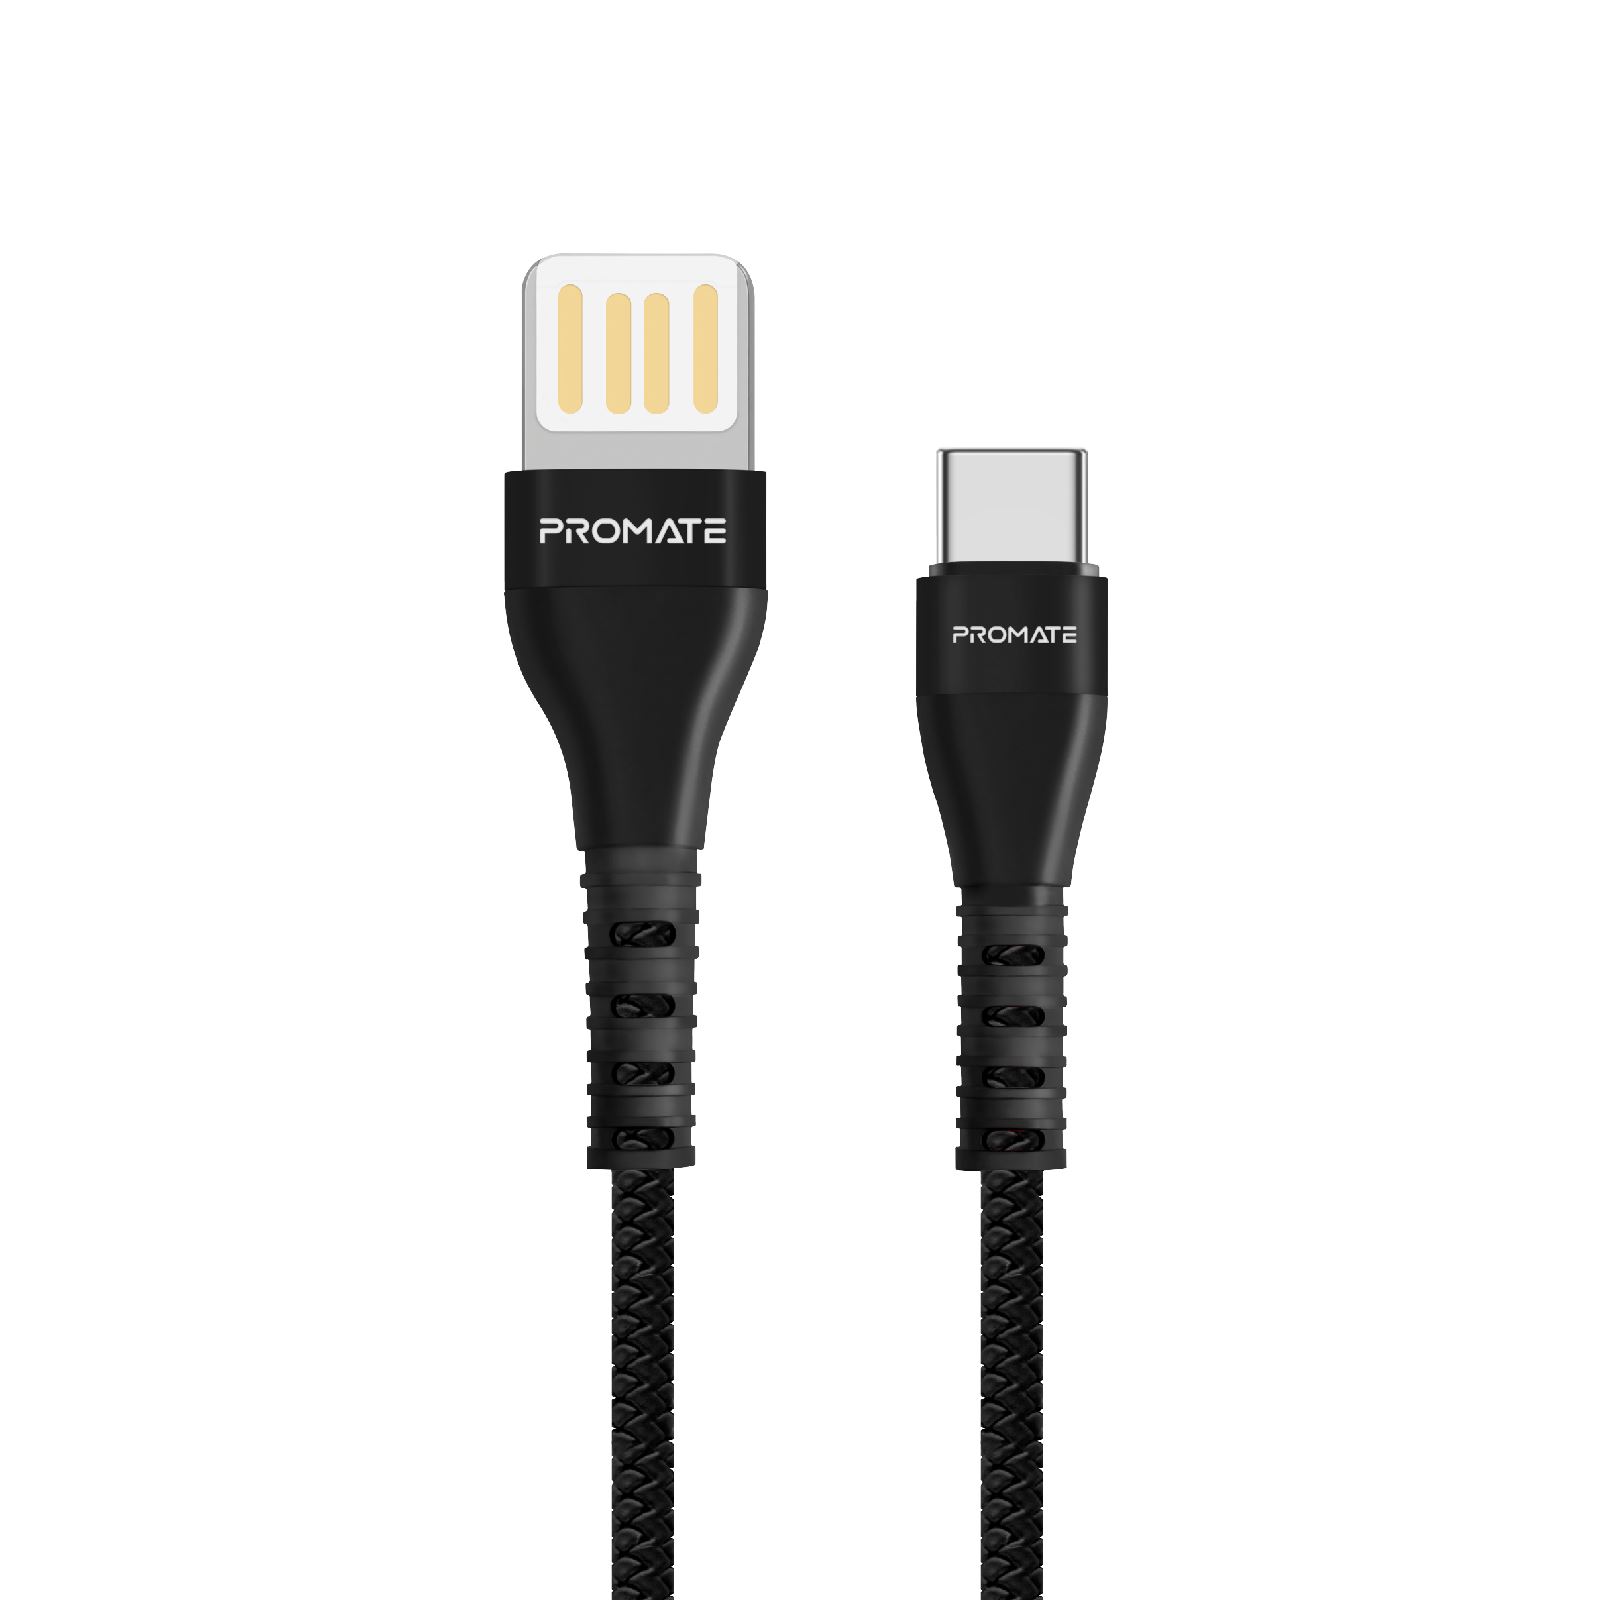 *PROMATE 1.2m USB-A to USB-C Sync & Charge Cable. Highly Durable